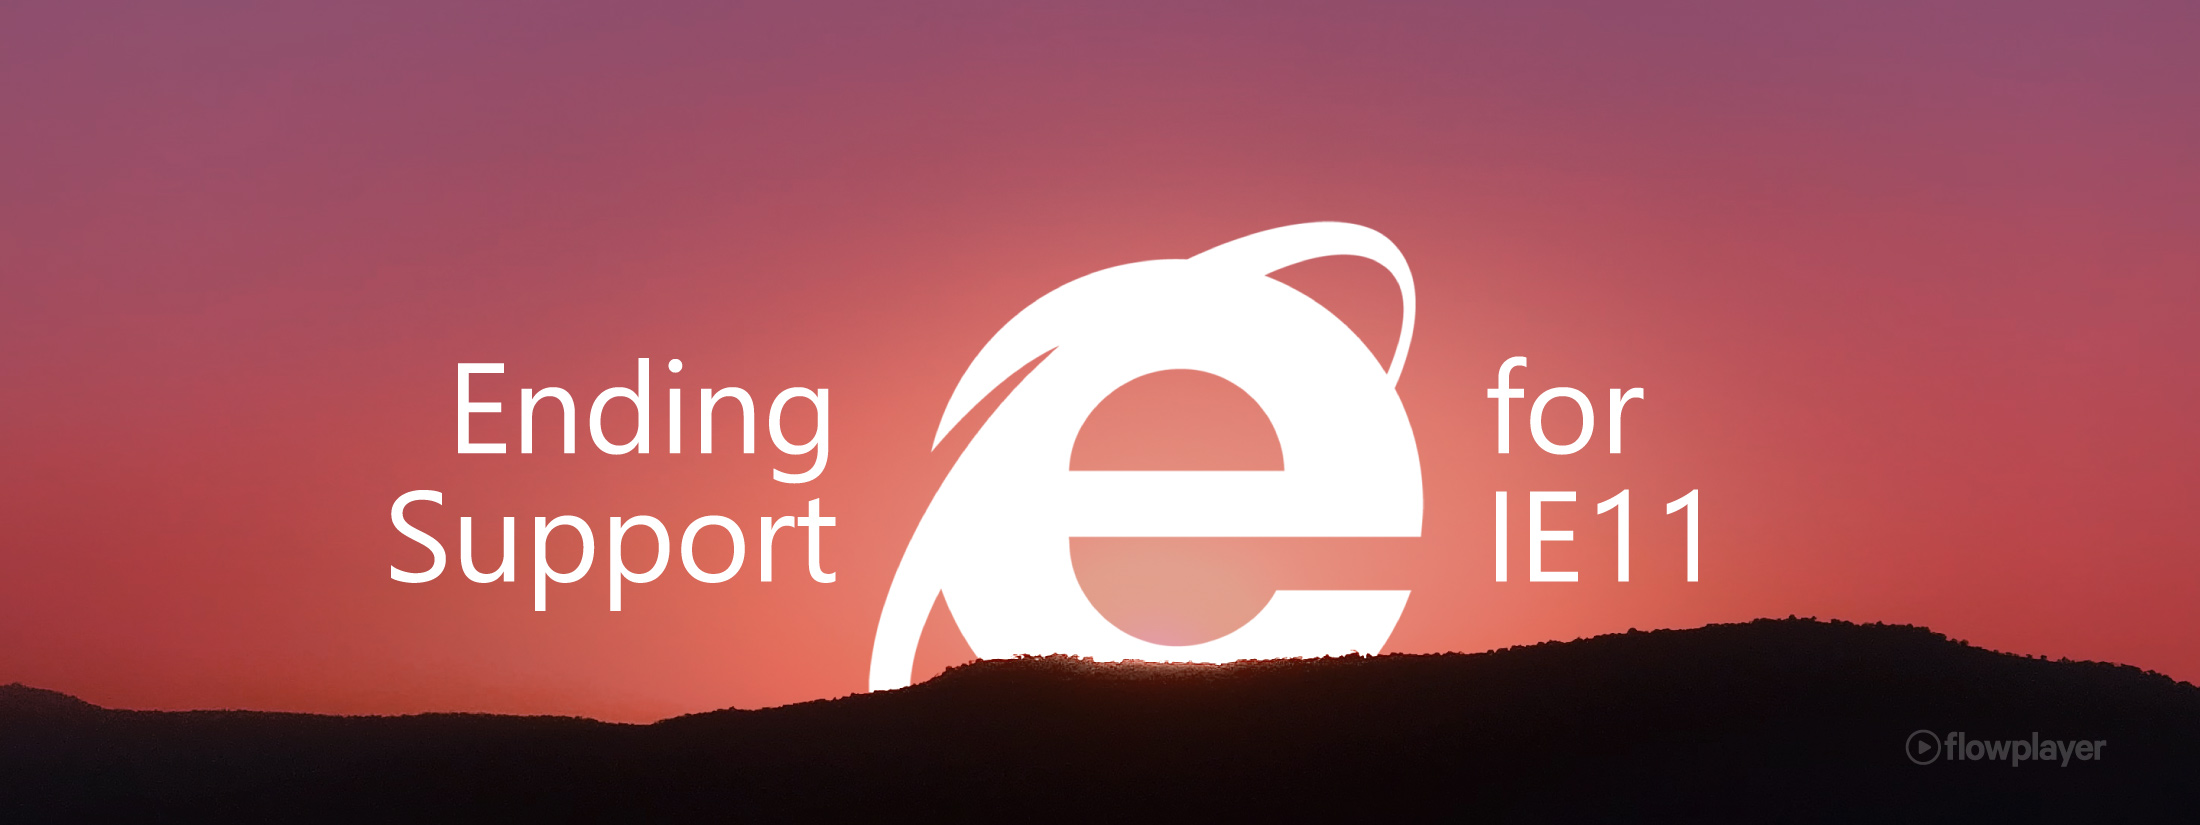 Ending Support For IE 11